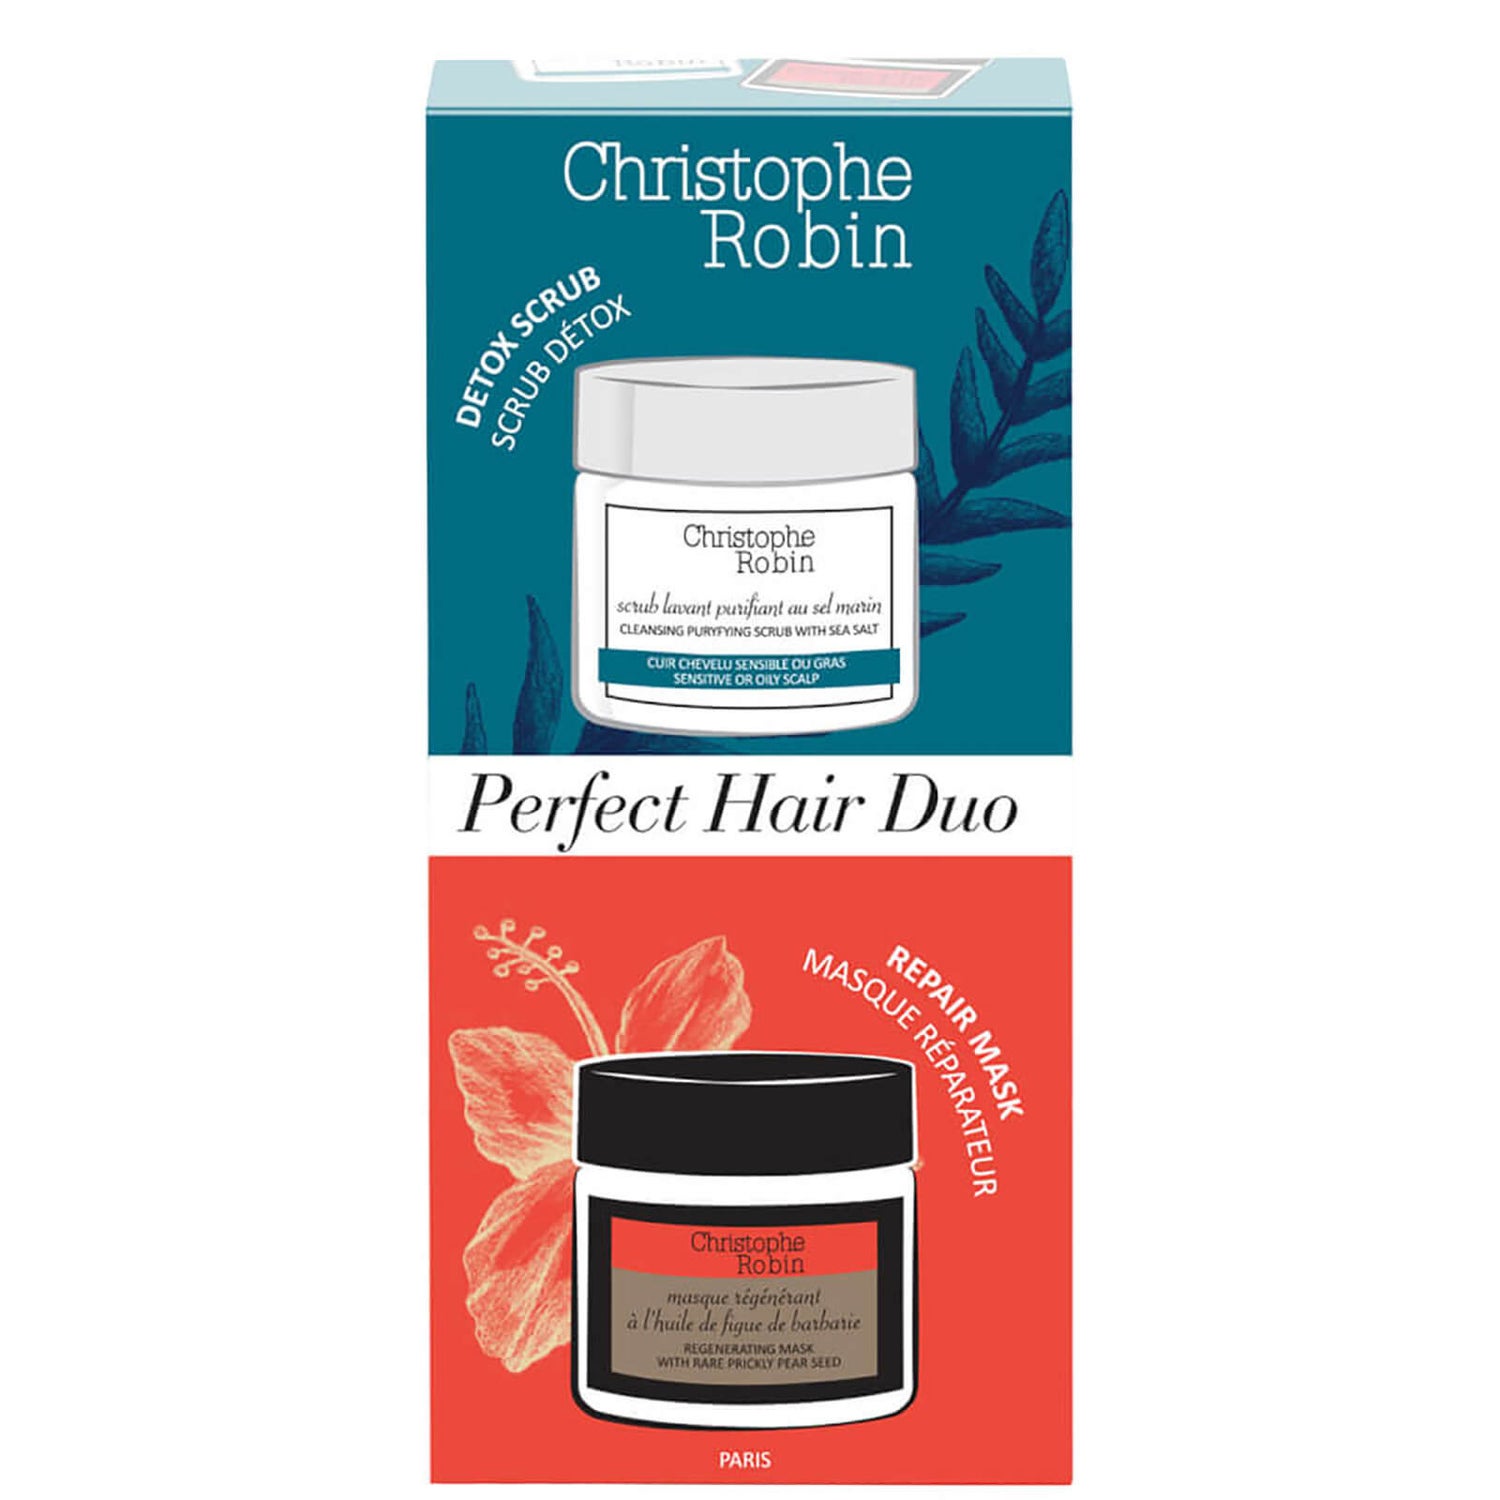 Christophe Robin Perfect Hair Duo (2 piece - $23 Value)